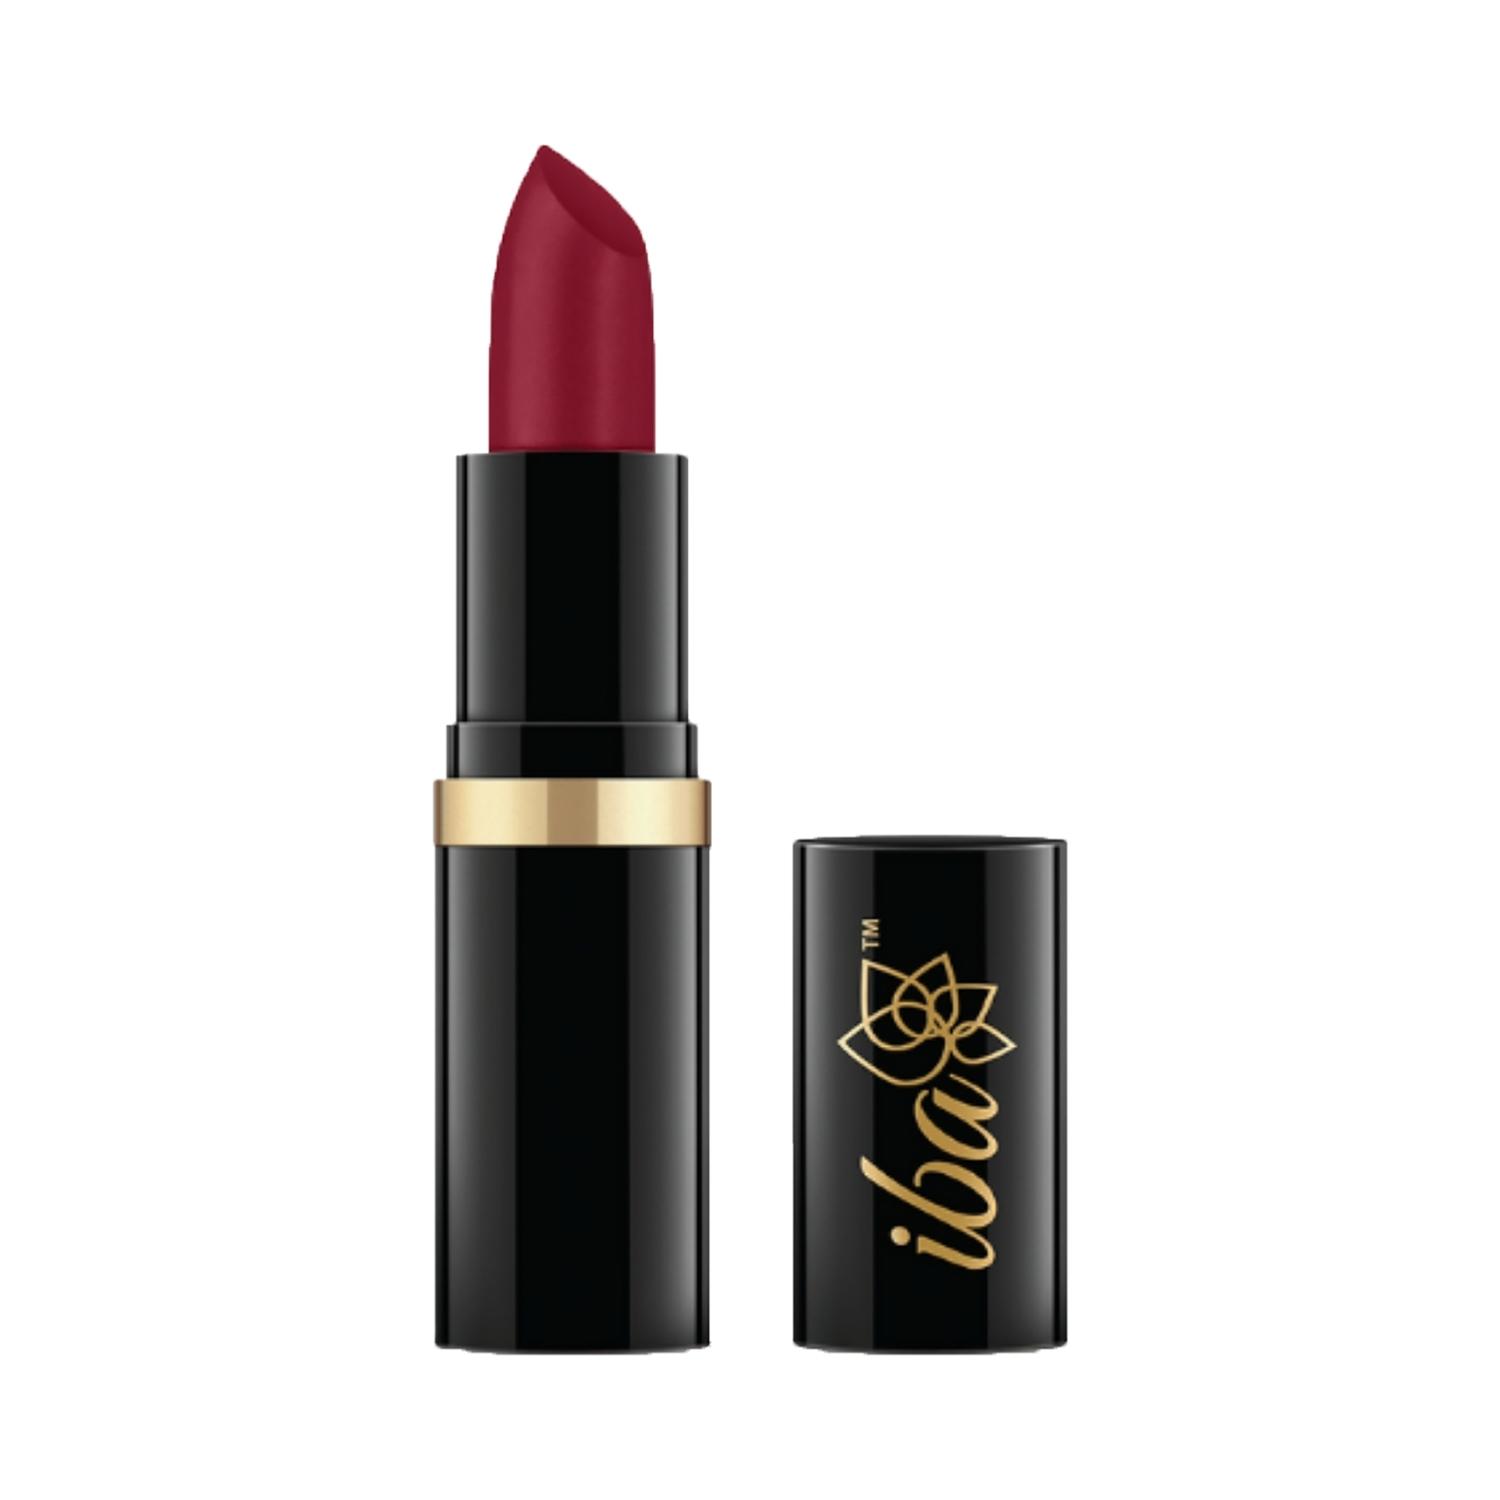 iba pure lips moisture rich lipstick - a68 mystery red (4g)